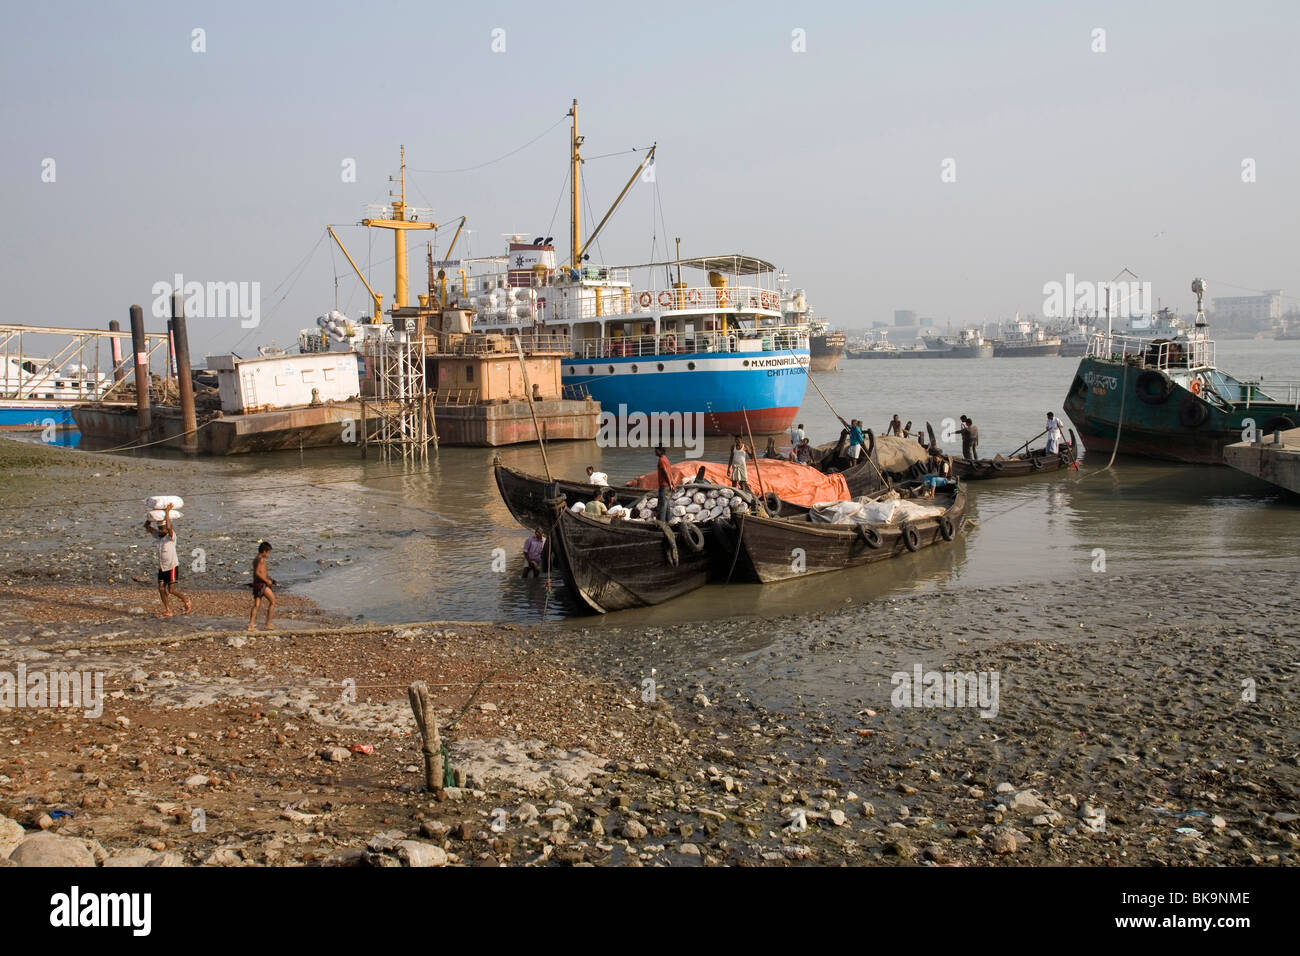 Workers unload cargo from a ship to a waiting lorry in the docks at Sadarghat, Chittagong, Bangladesh Stock Photo